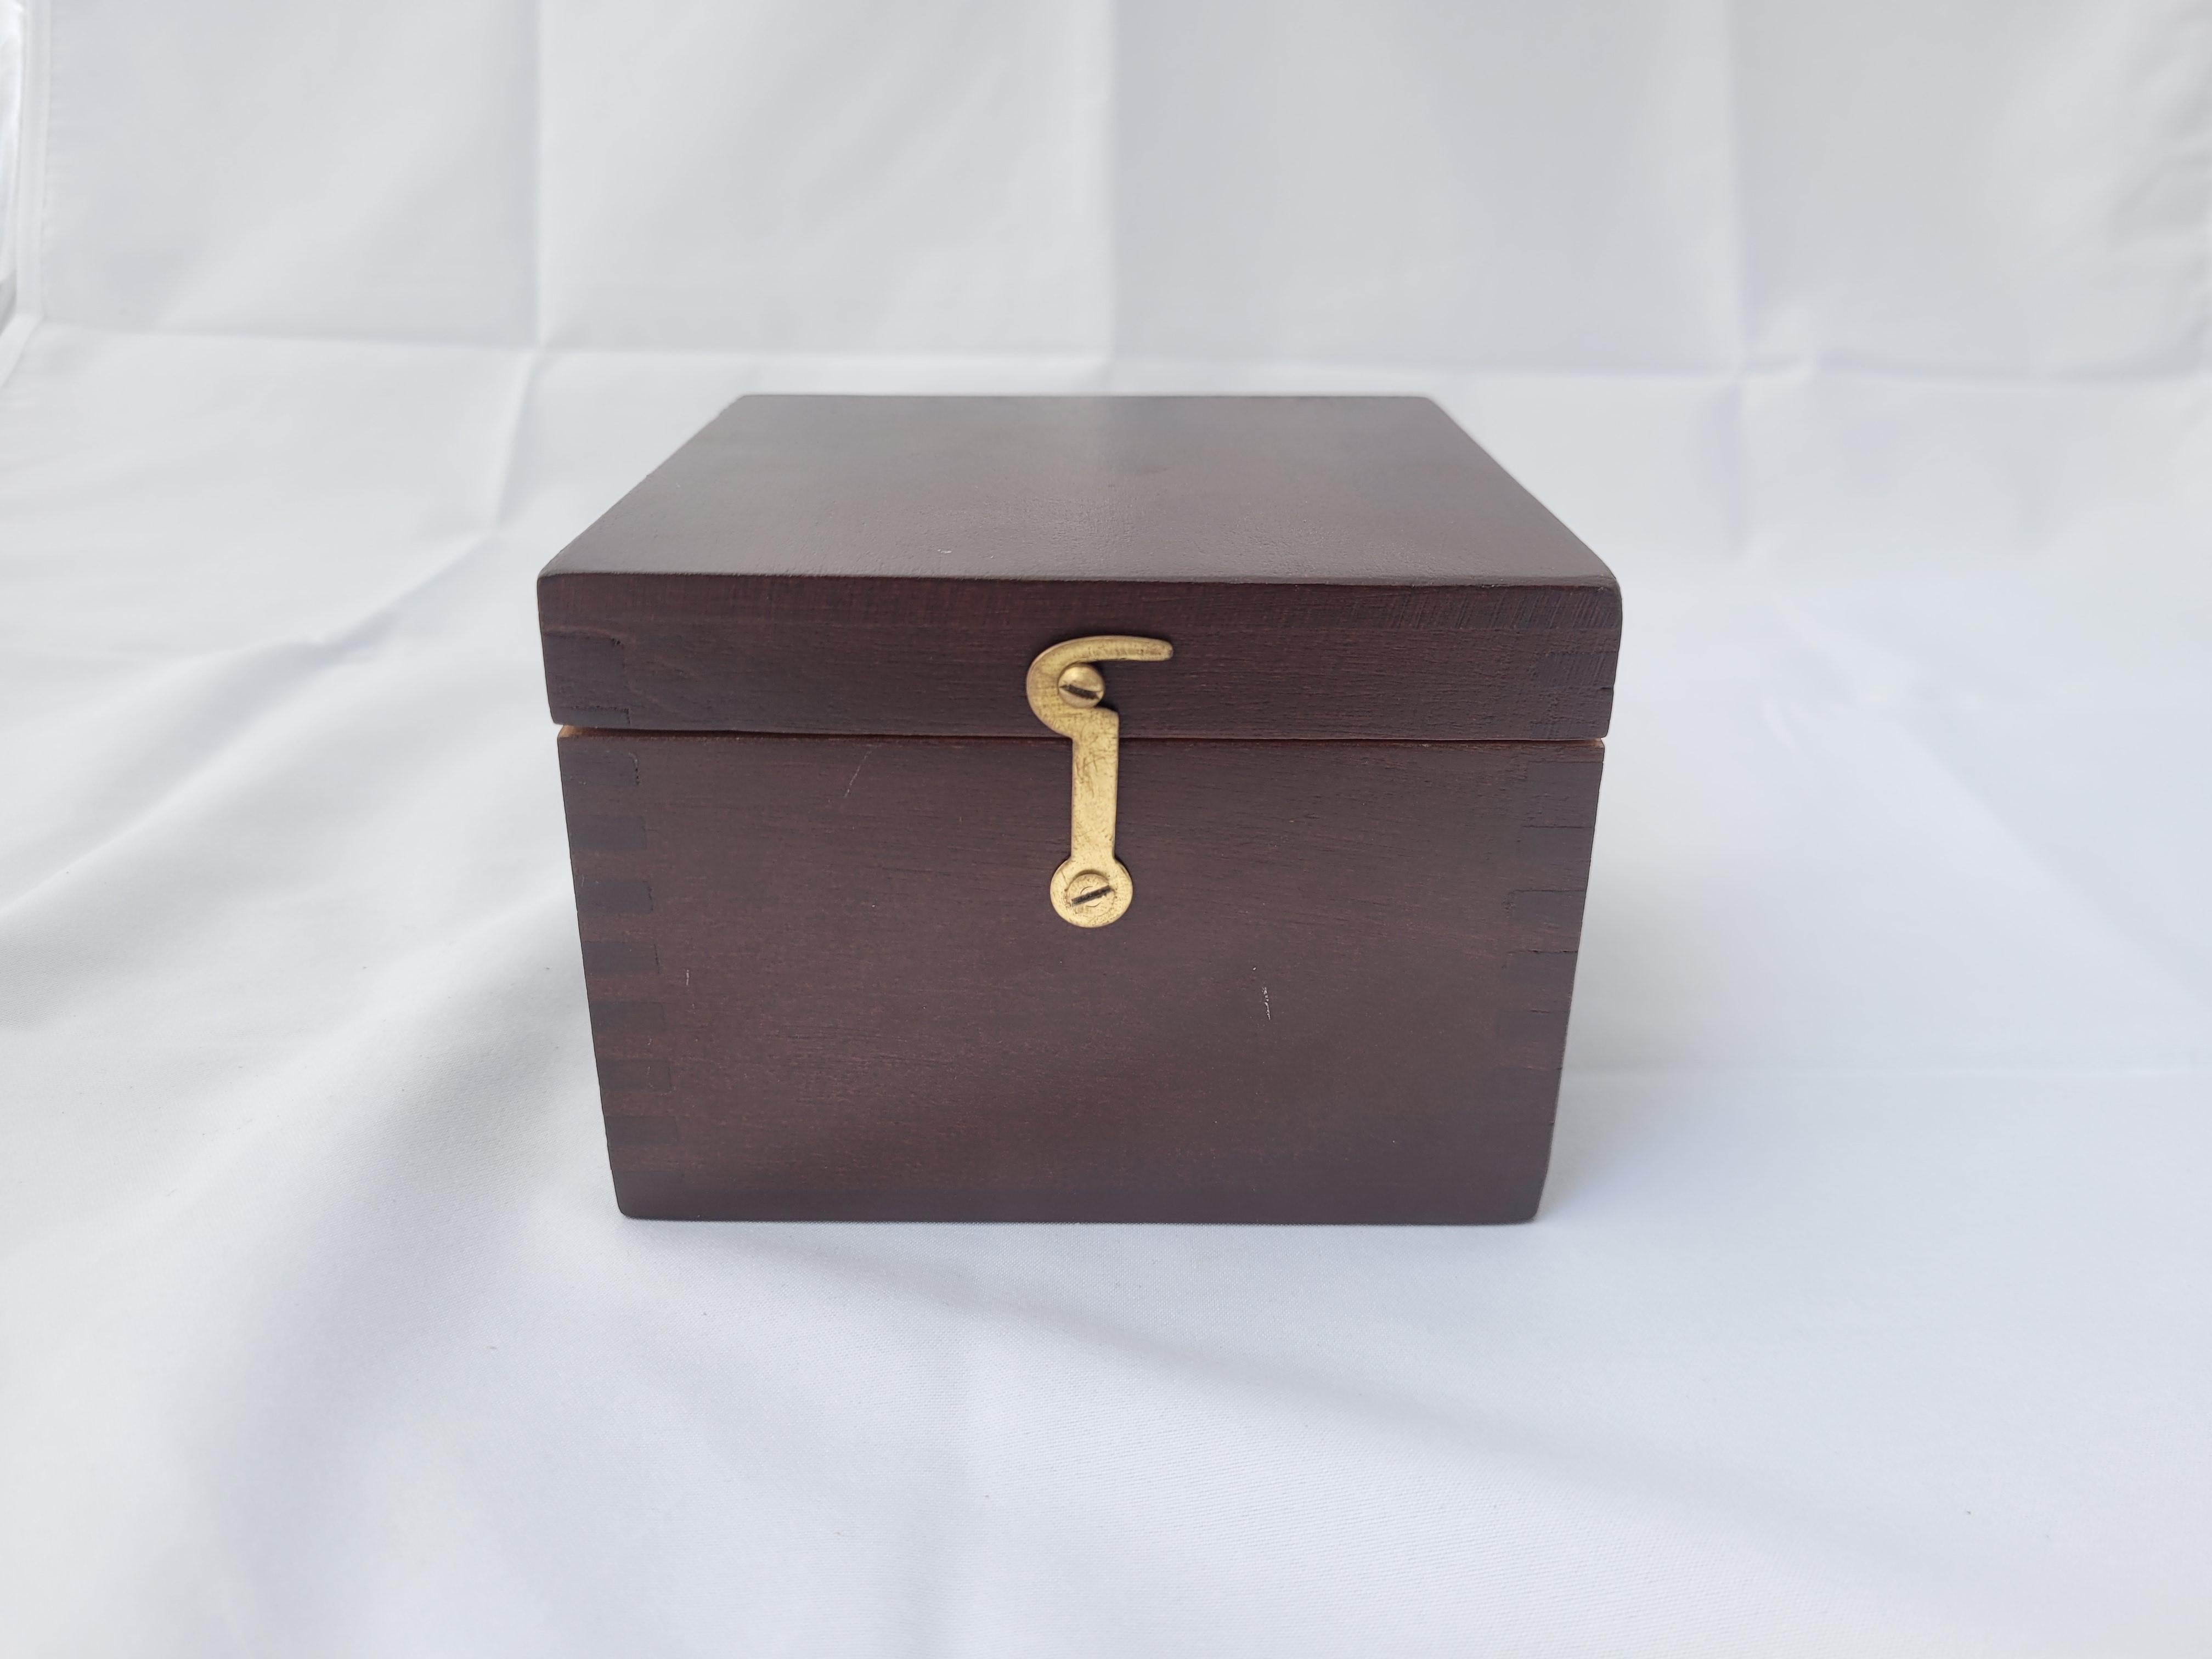 North American Brass Boat Compass in Varnished Wood Box